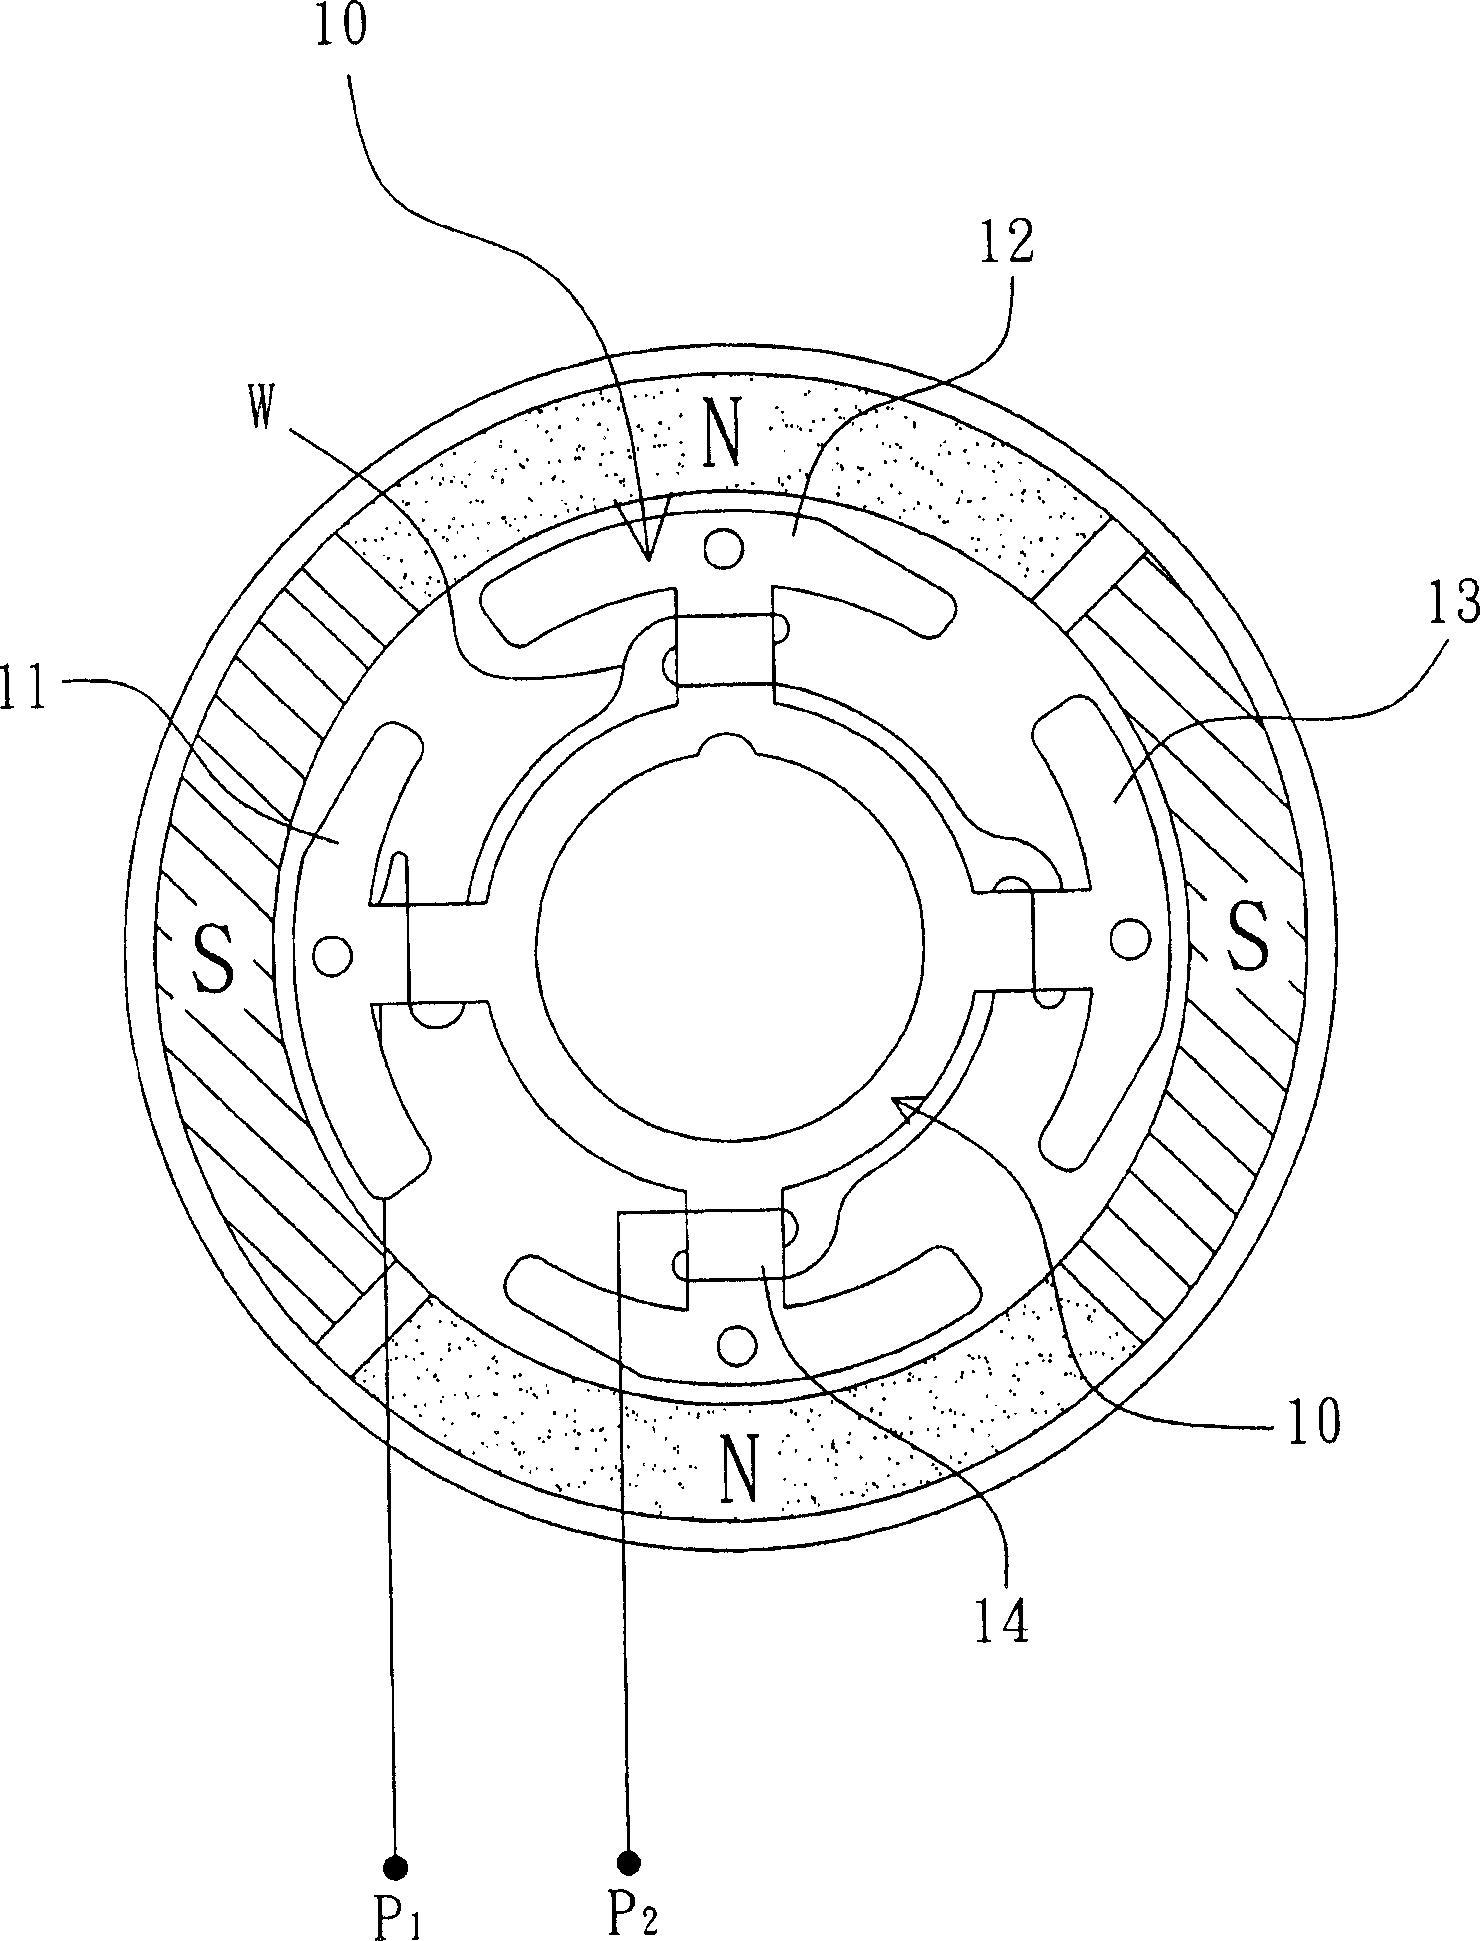 Single-phase motor and its stator winding and tie lines method